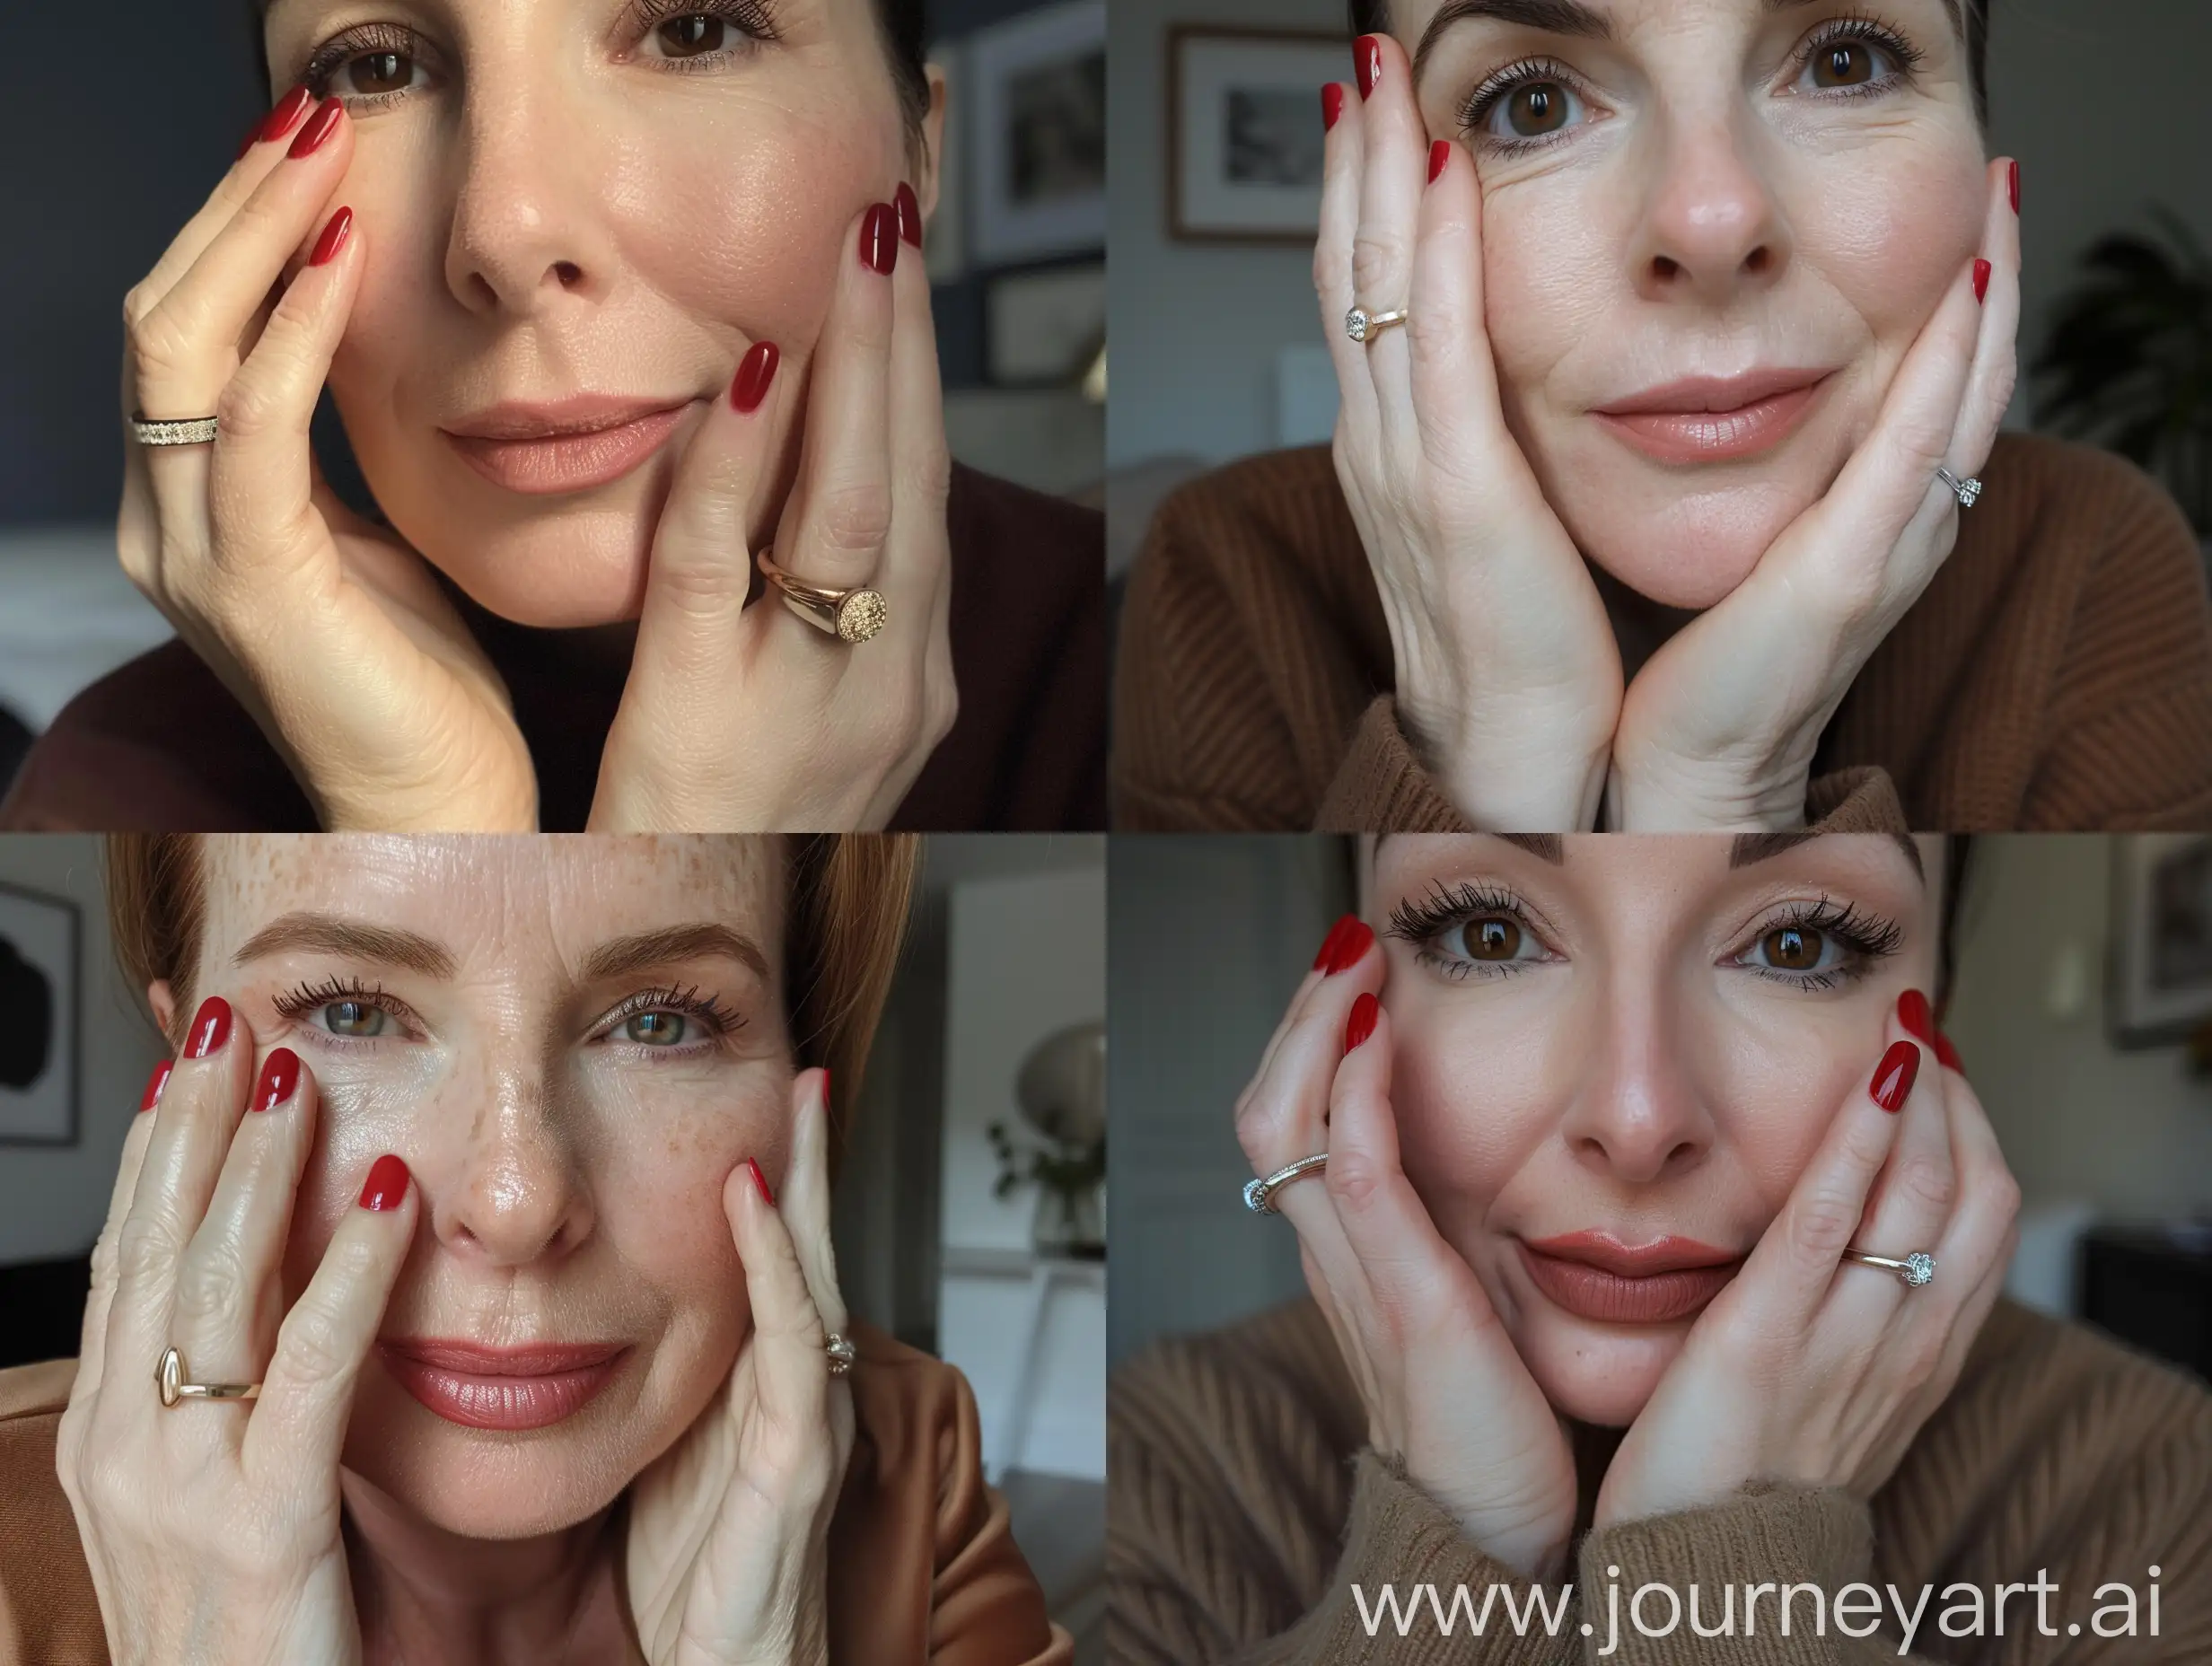 Aesthetic instagram selfie of a mother in her mid 30's, hands resting on face, wedding ring, red gel nail polish, British, matte brown makeup, lipstick, London flat, motherly face in selfie, close up of face selfie